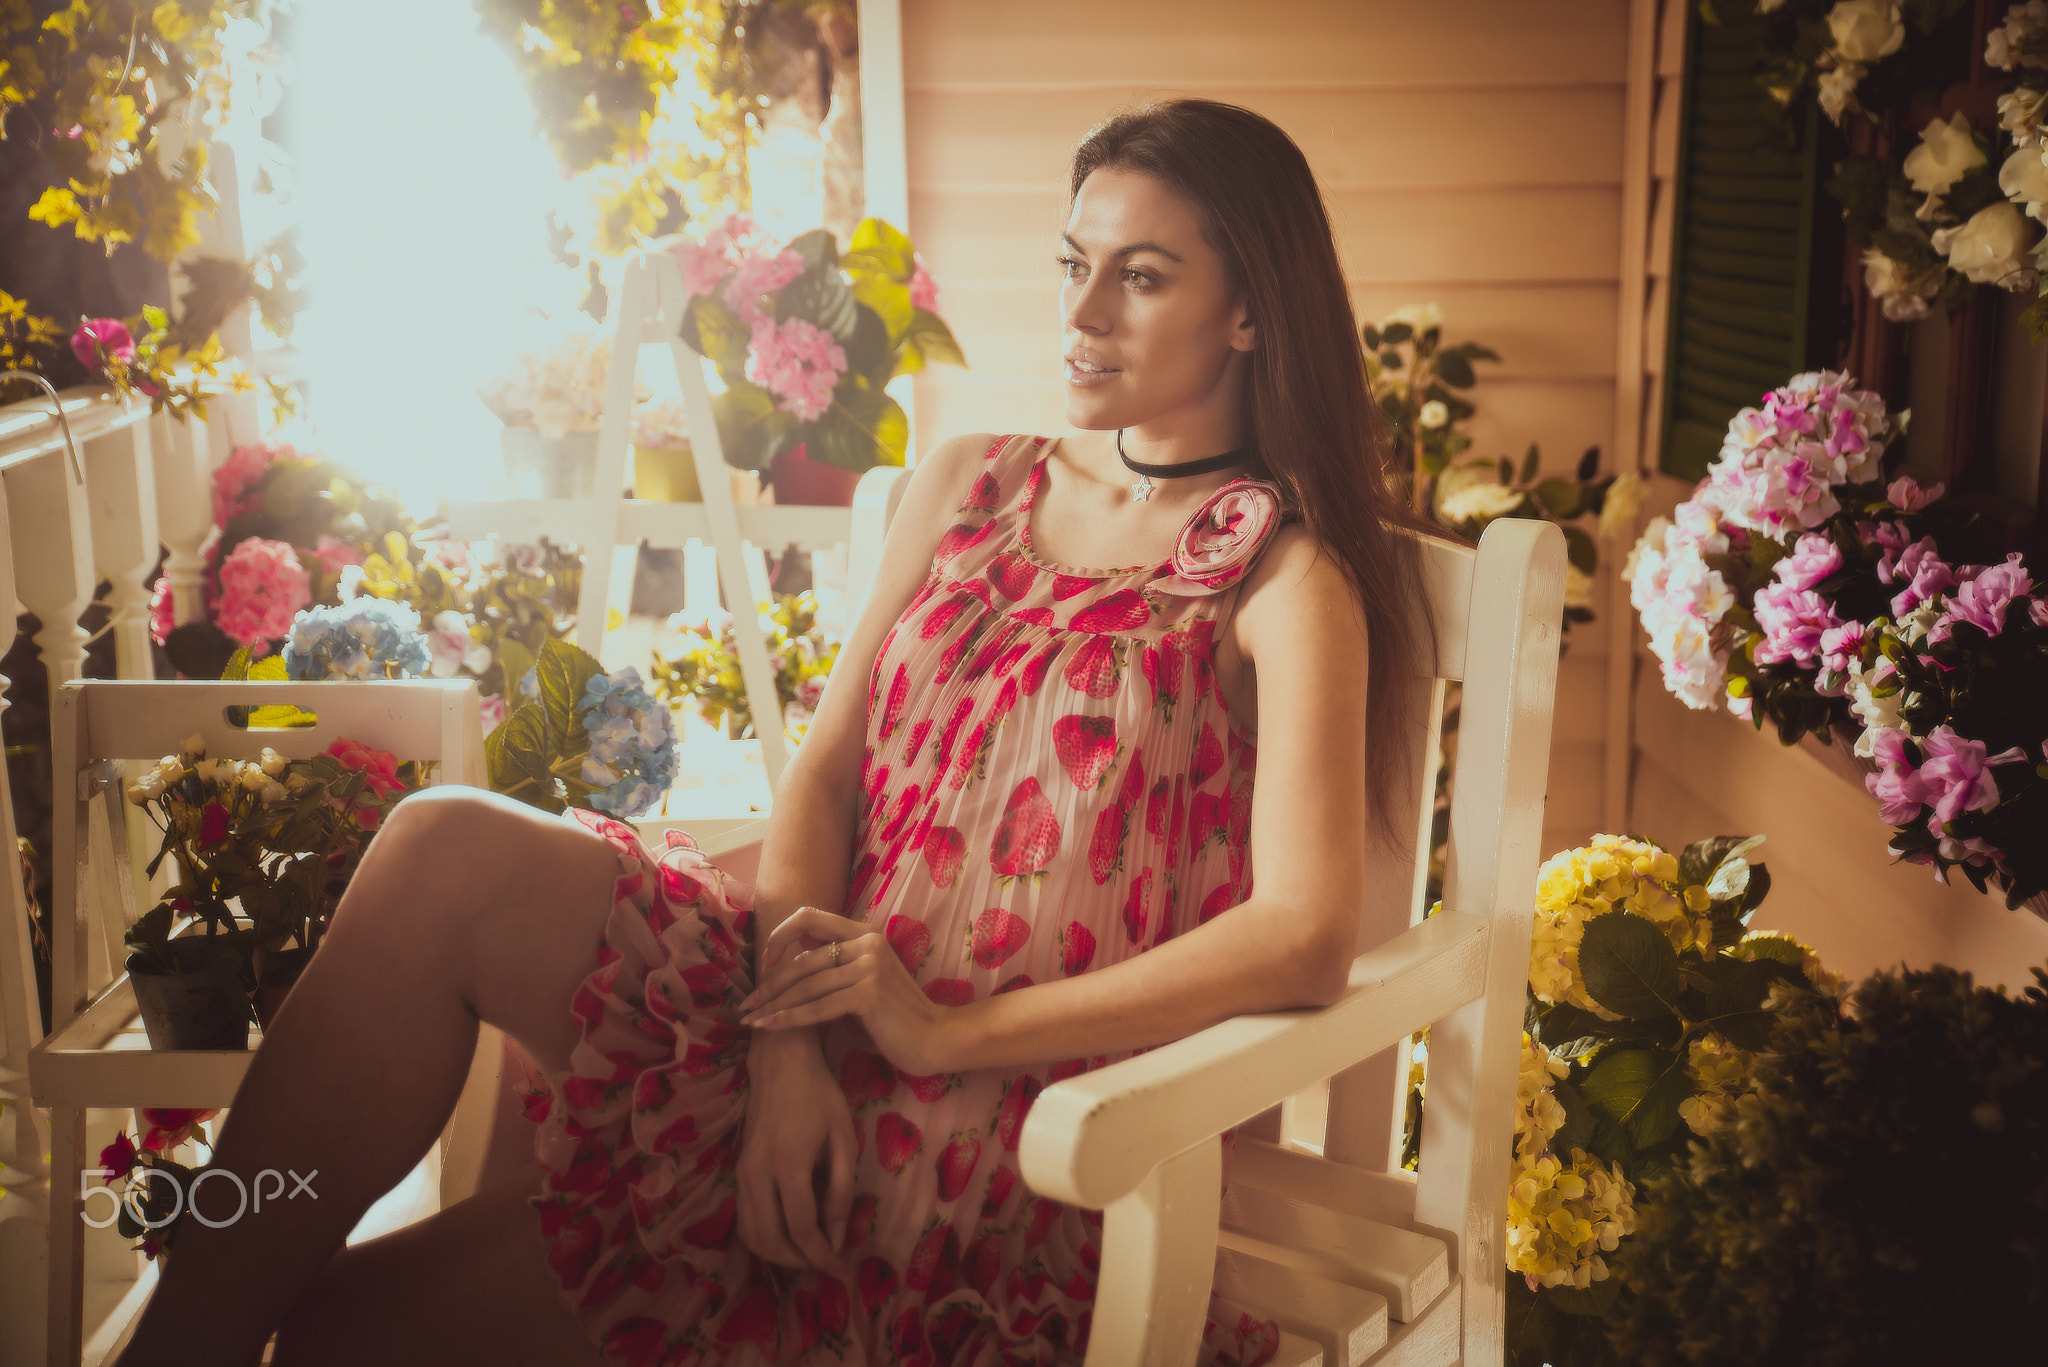 People 2048x1367 Cristian Negroni women flowers chair model looking away dress brunette overexposed 500px watermarked